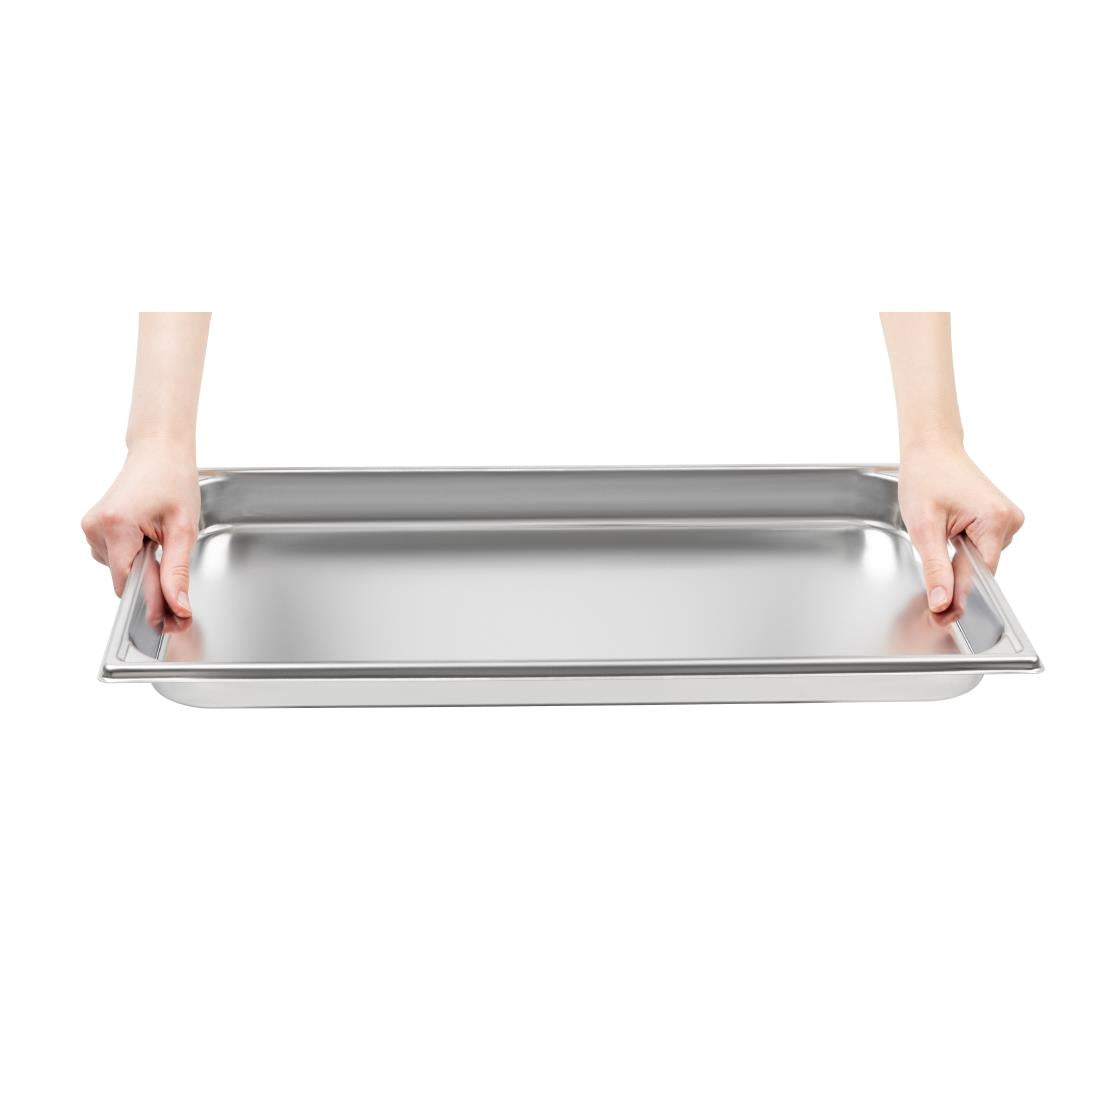 Bourgeat Stainless Steel 1/2 Gastronorm Pan 40mm JD Catering Equipment Solutions Ltd